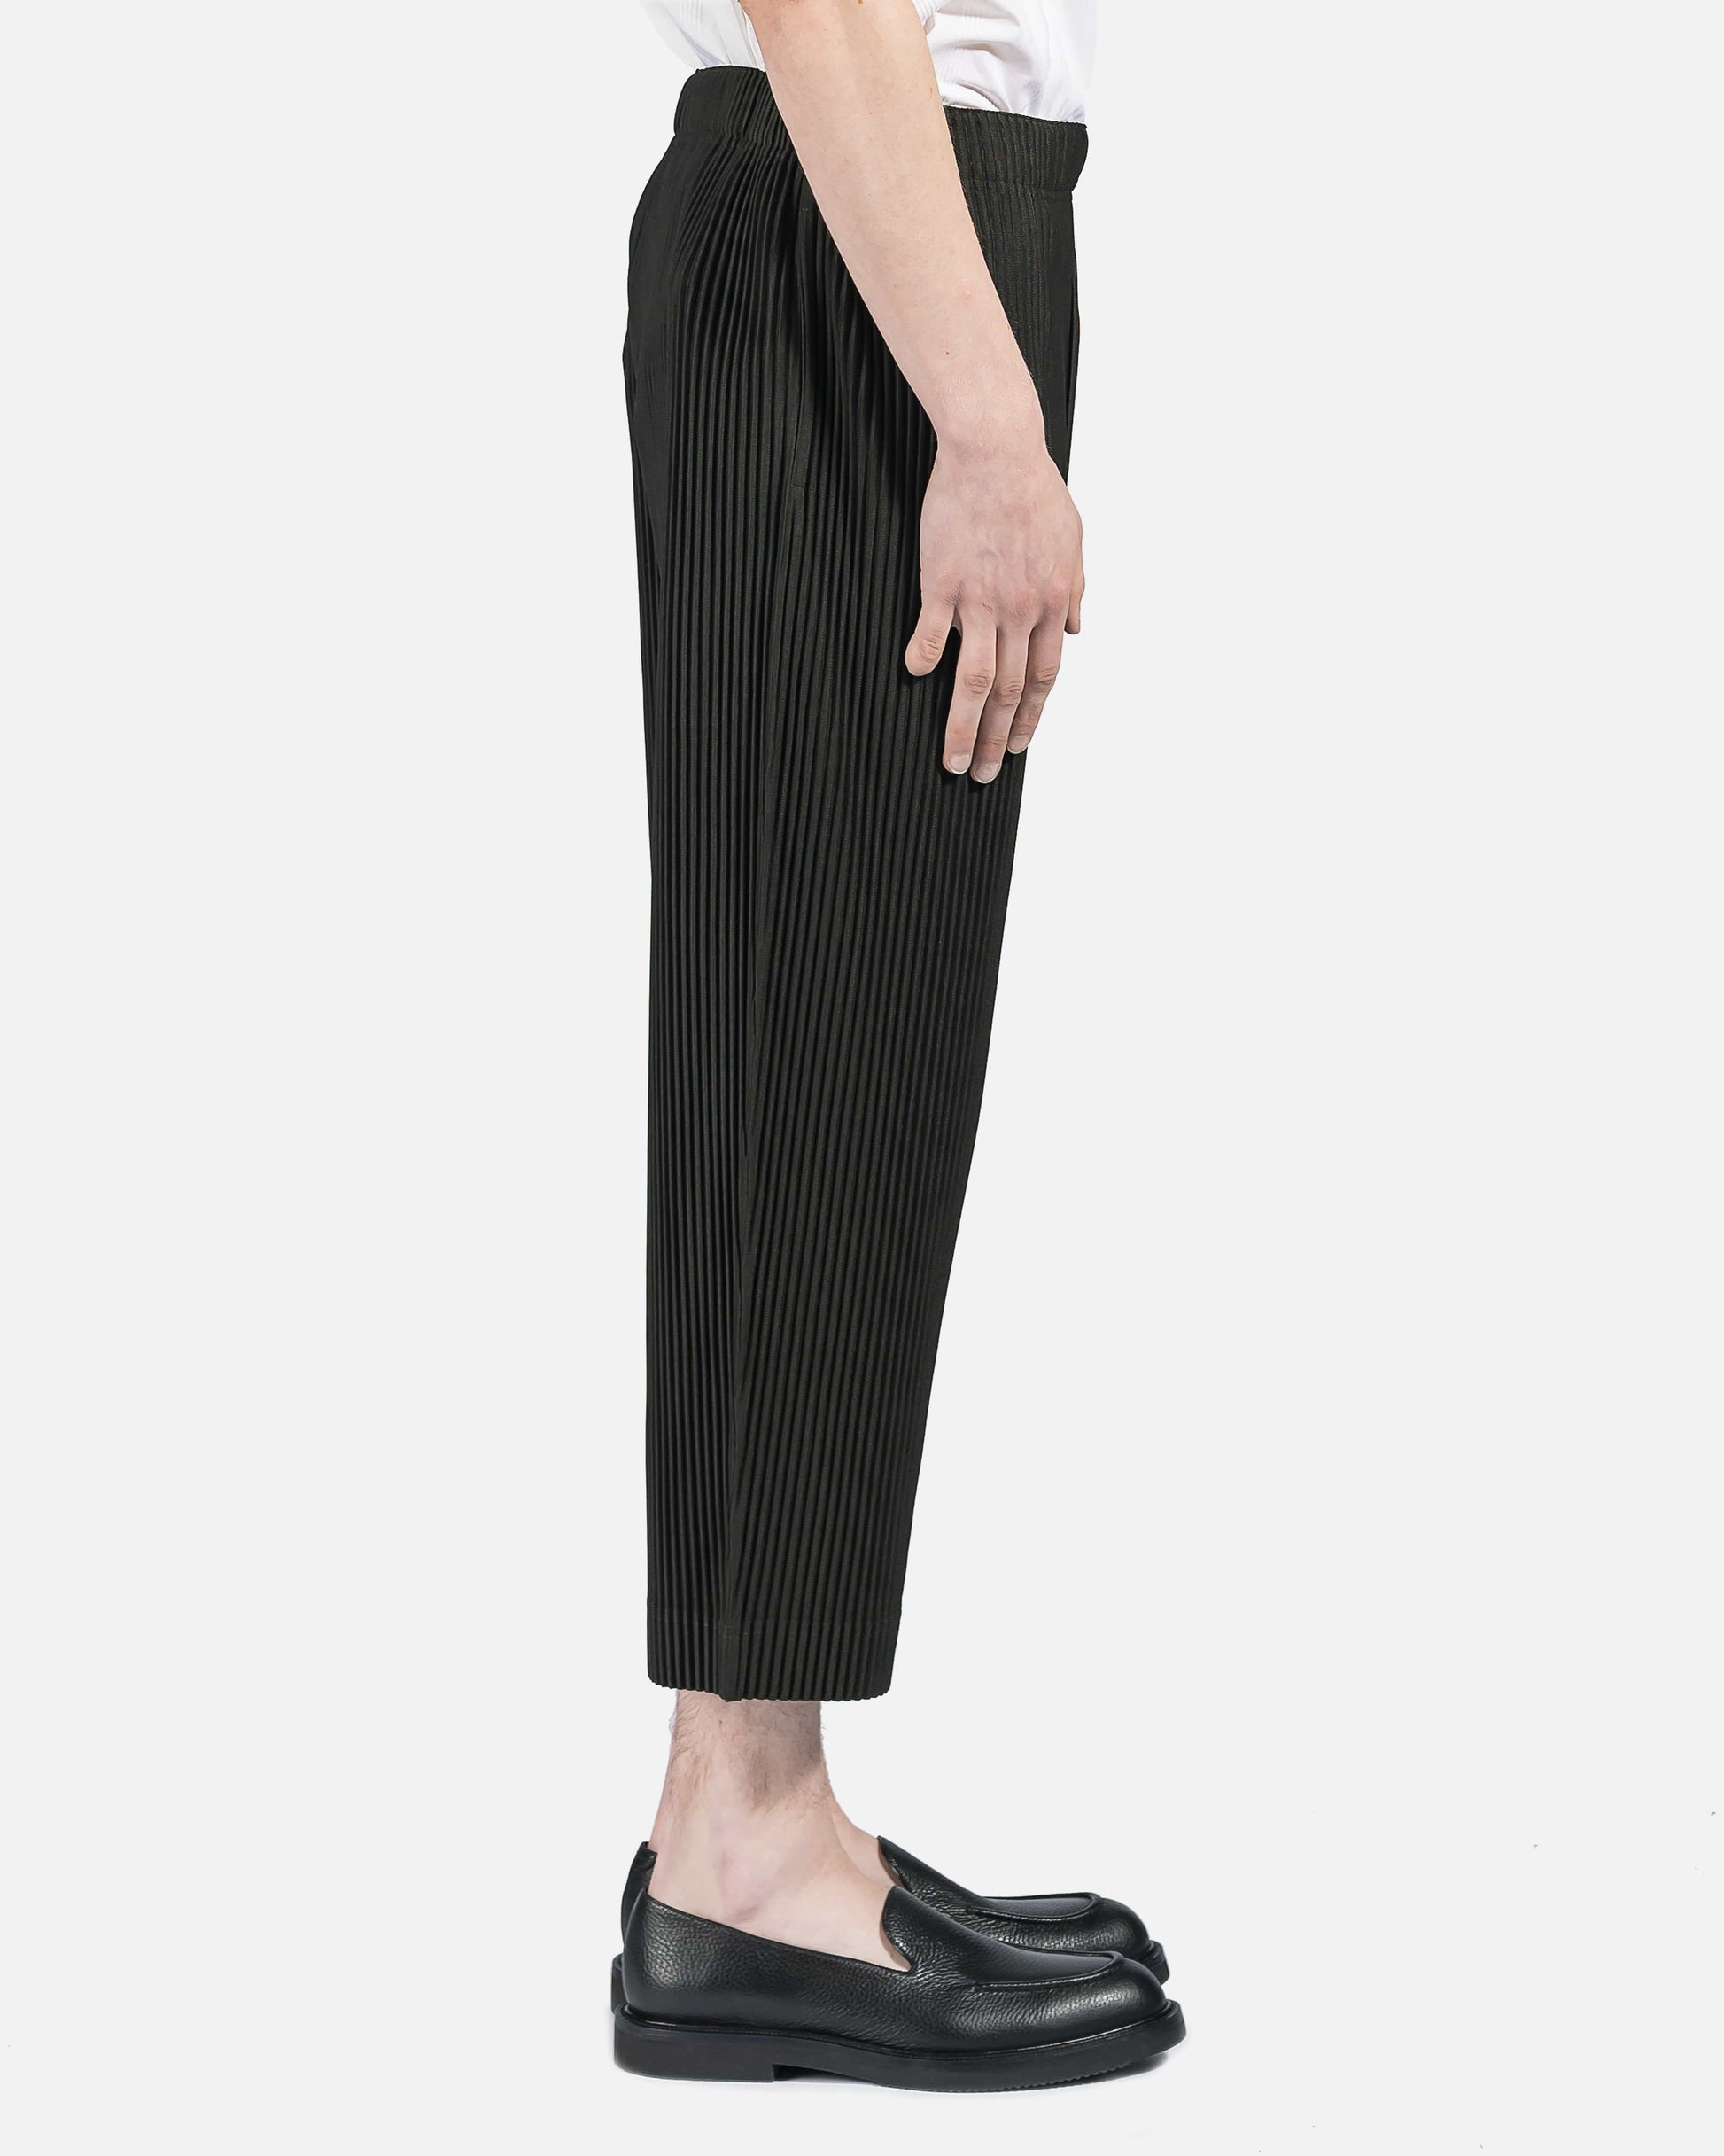 Homme Plissé Issey Miyake Men's Pants Wide Pleated Trousers in Forest